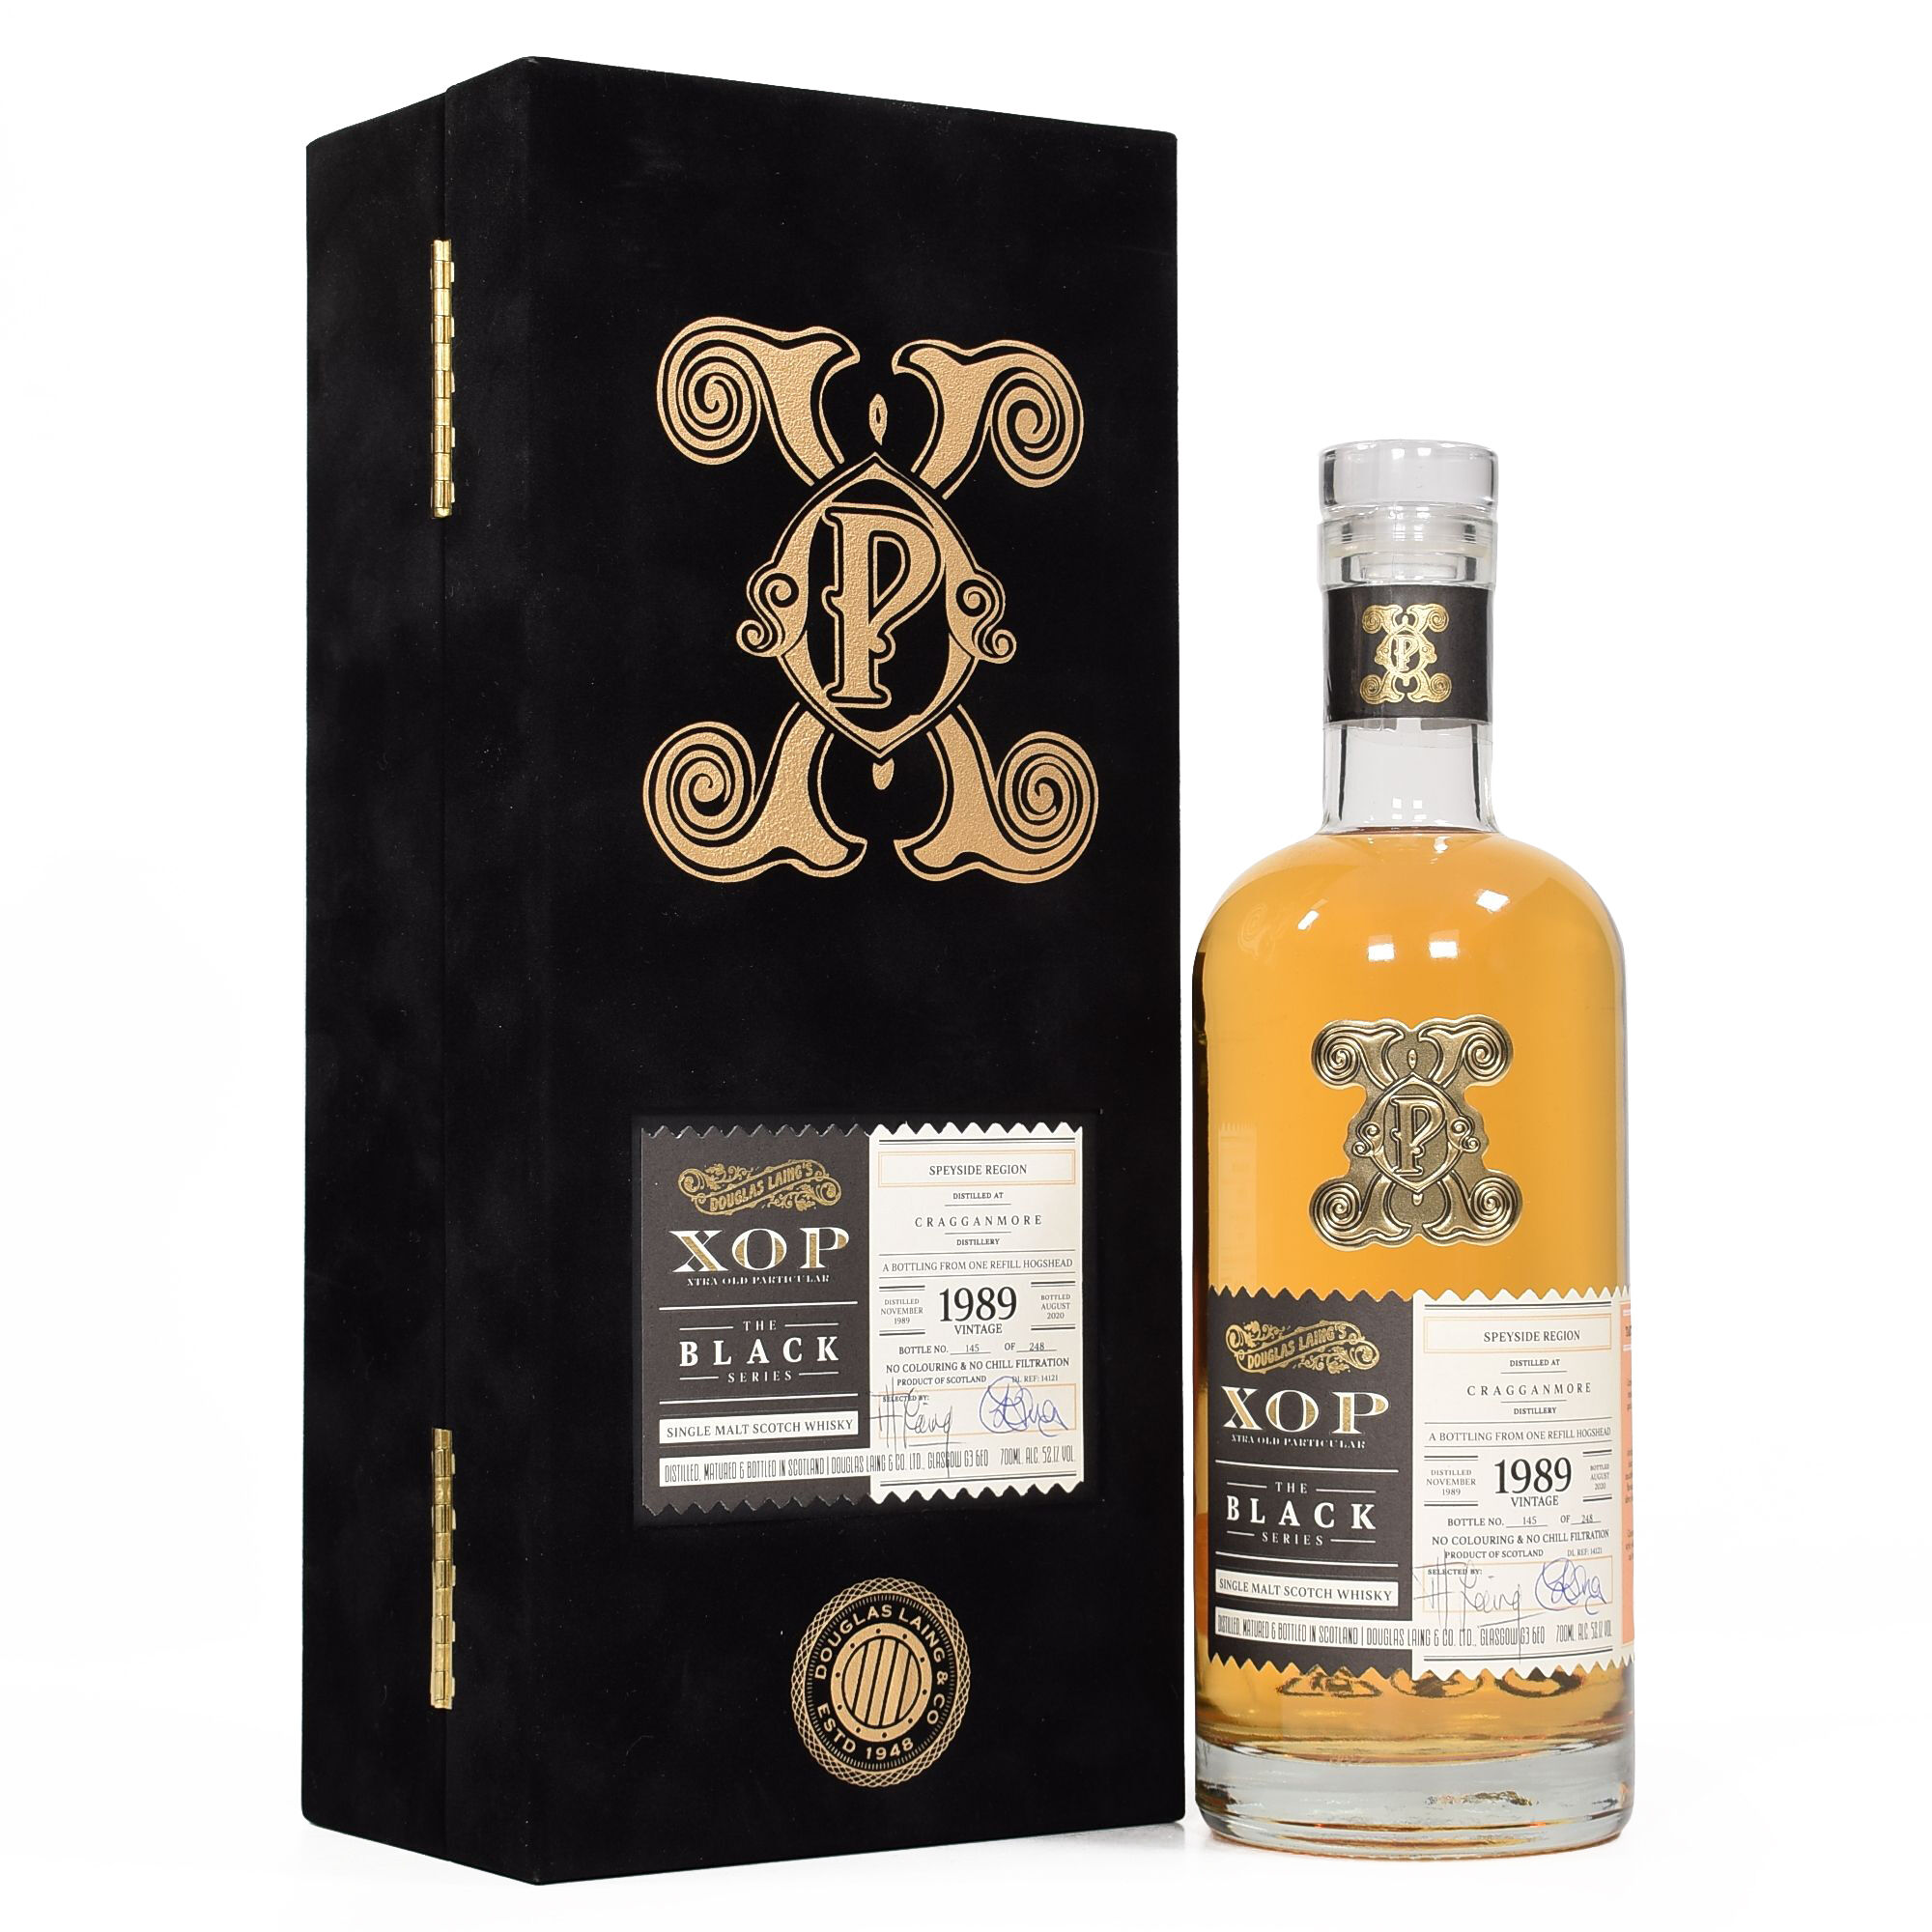 Xtra Old Particular Black Cragganmore 30 Years Single Cask Single Malt Whisky – Speyside Scotland